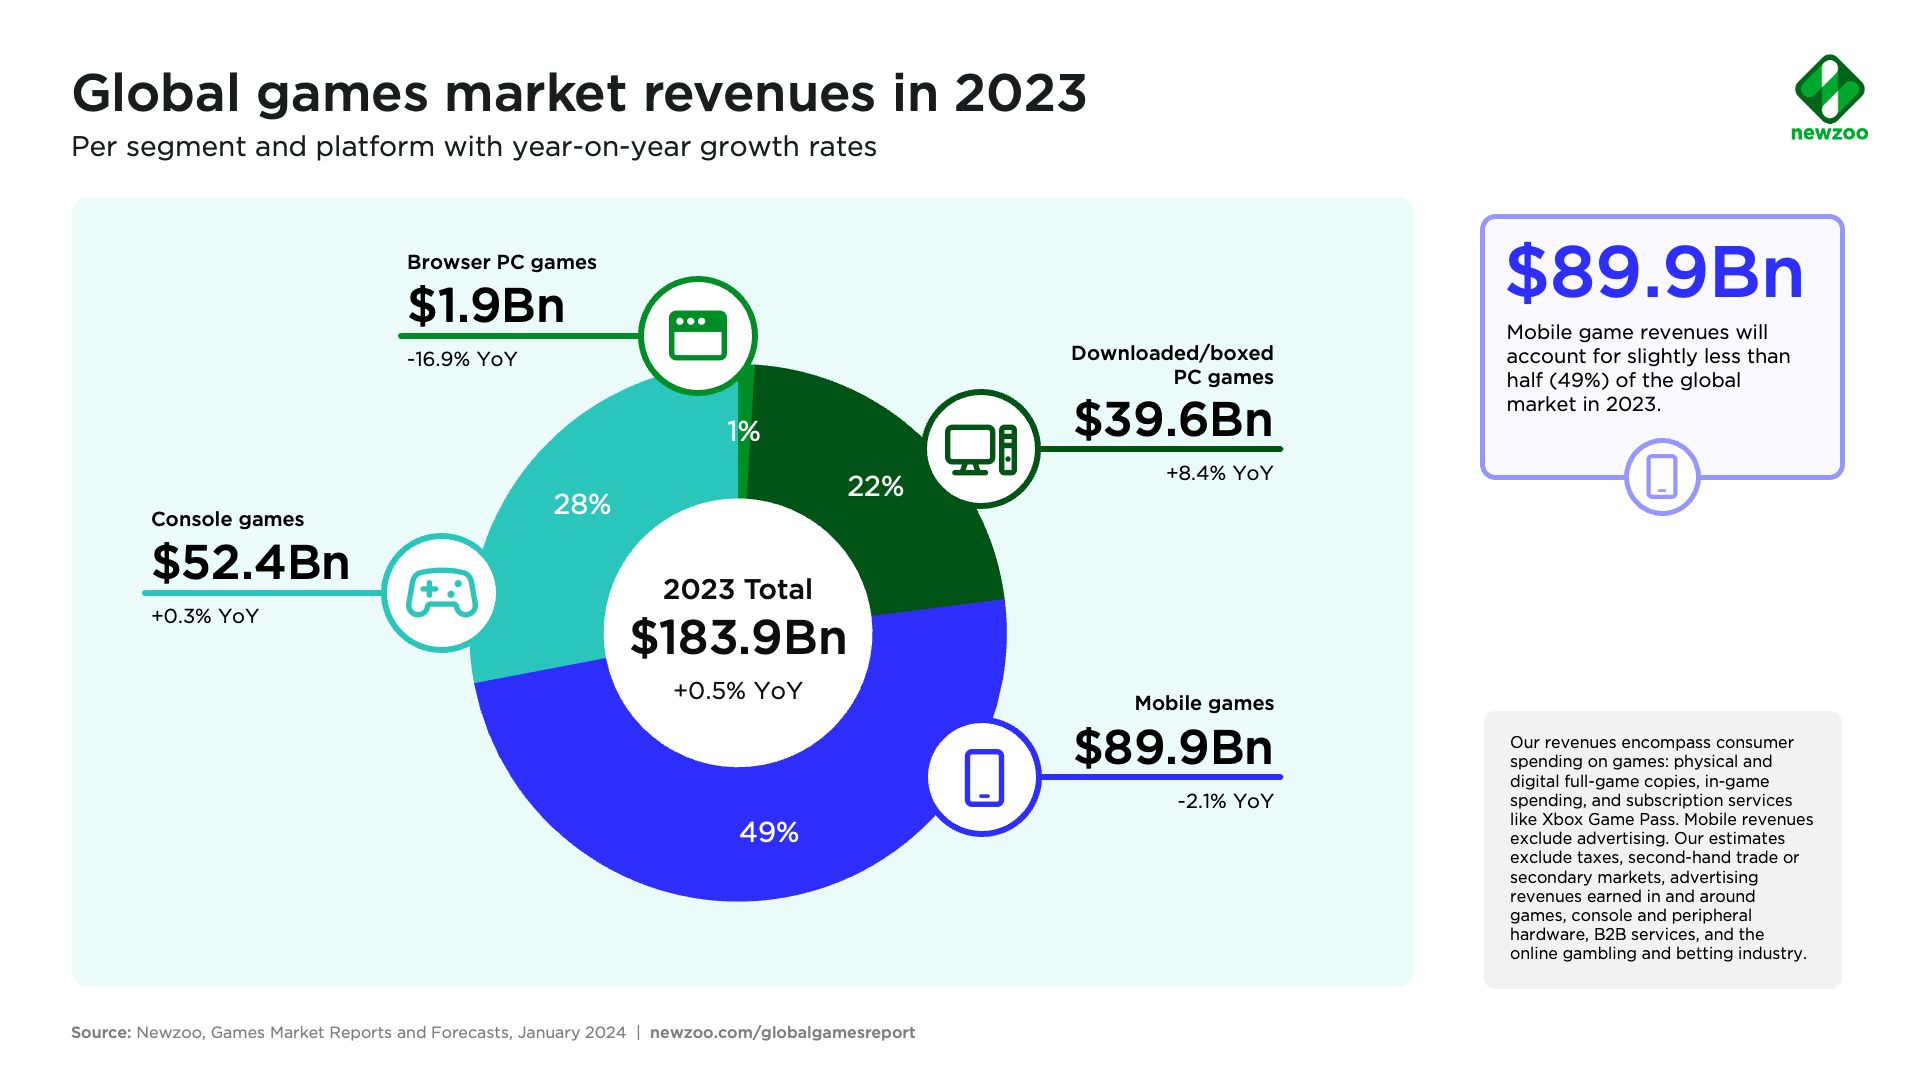 2023 global games market revenue in 2023 graph, showing PC game revenue increasing 8.4% year over year.